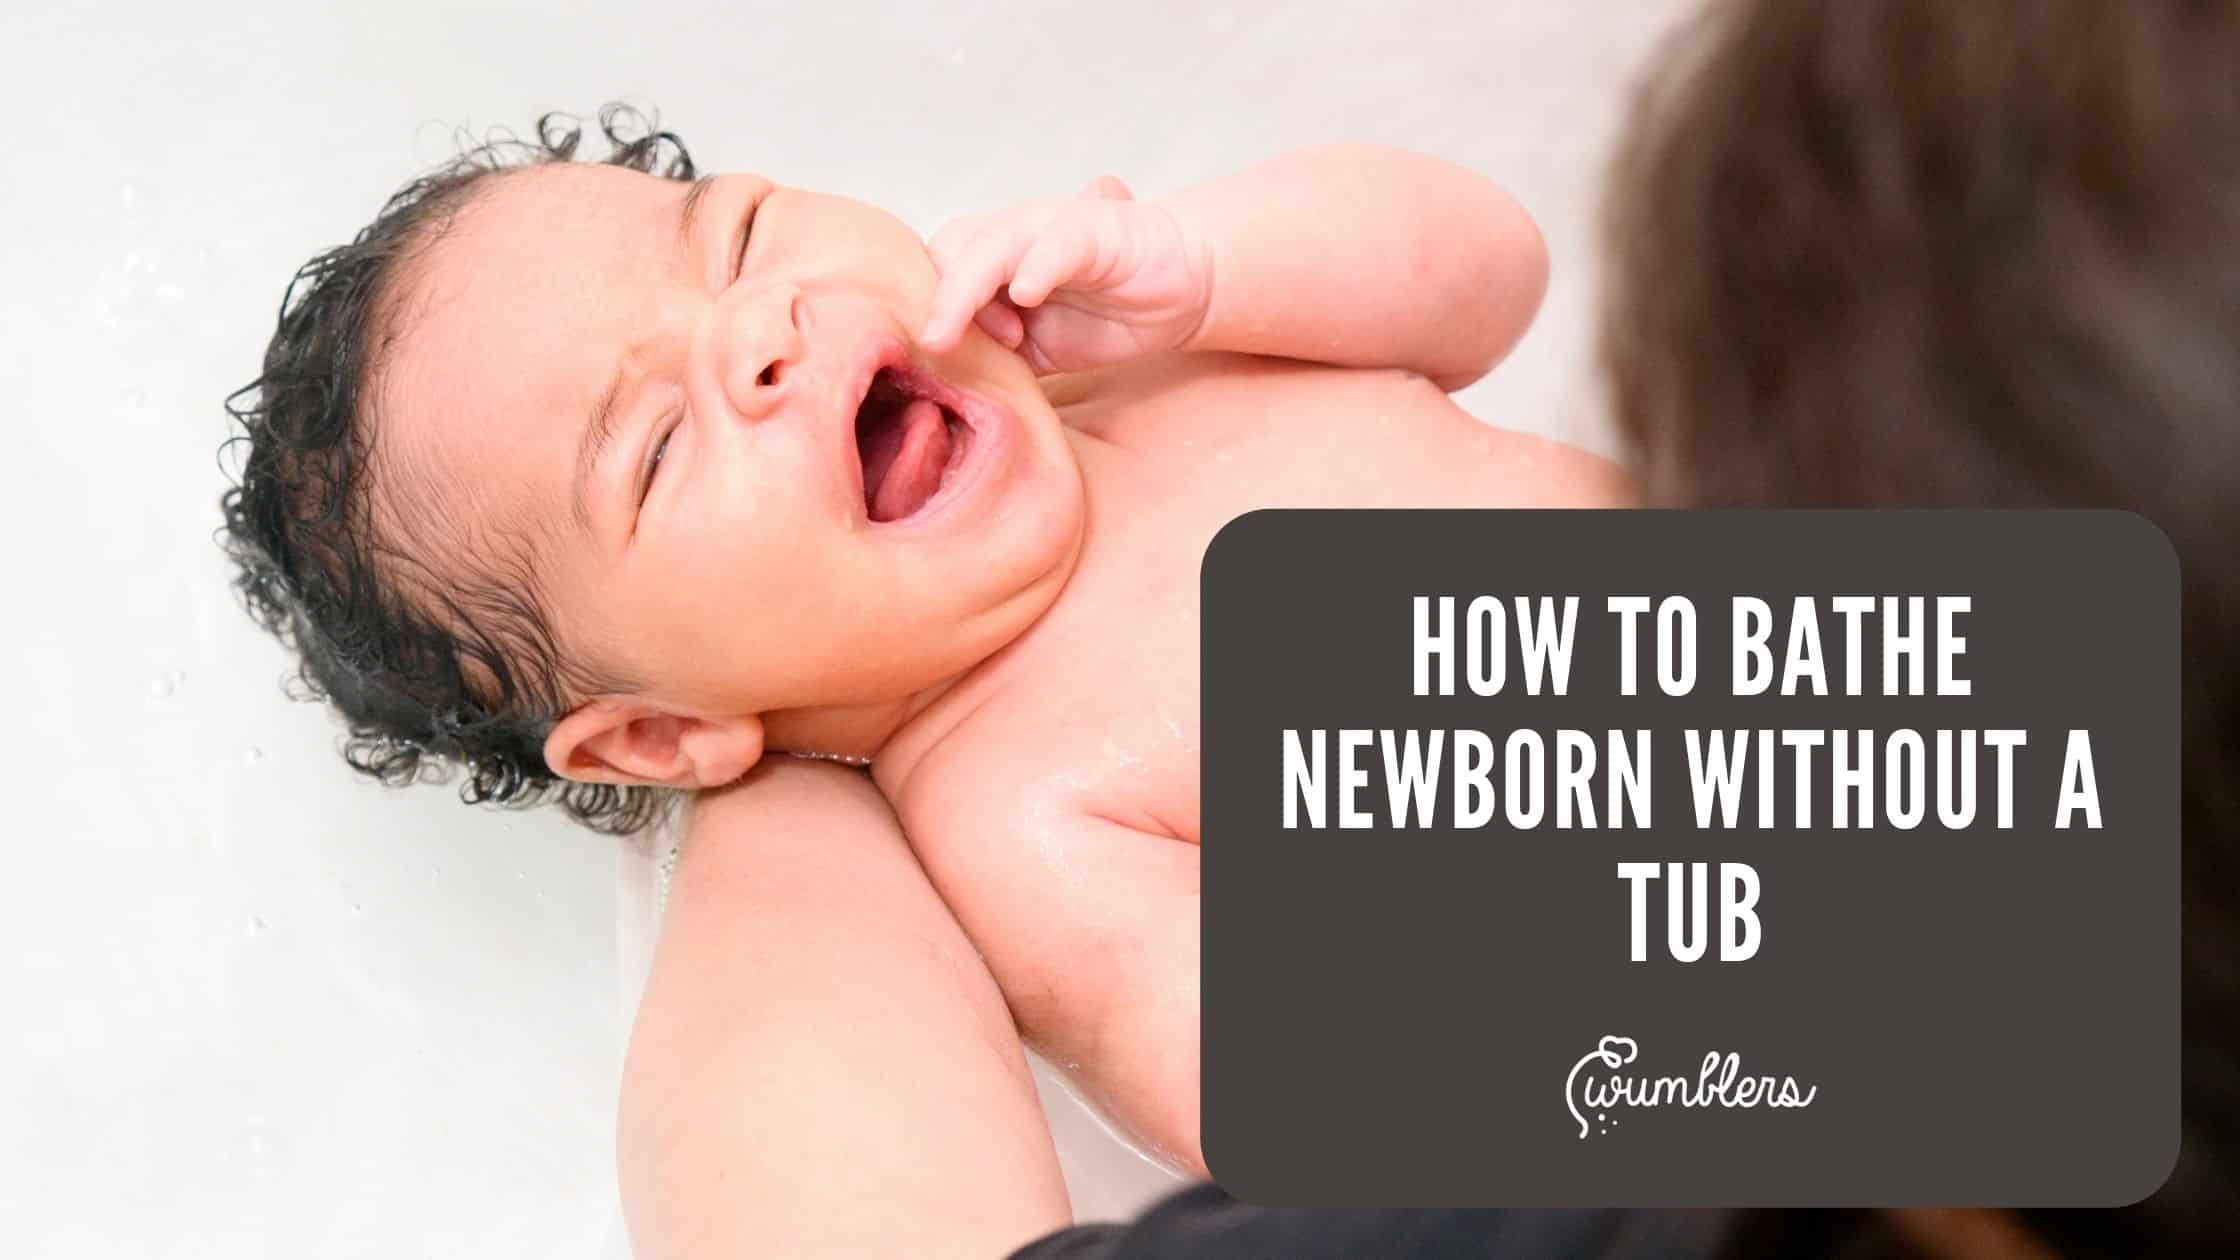 How To Bathe Newborn Without a Tub